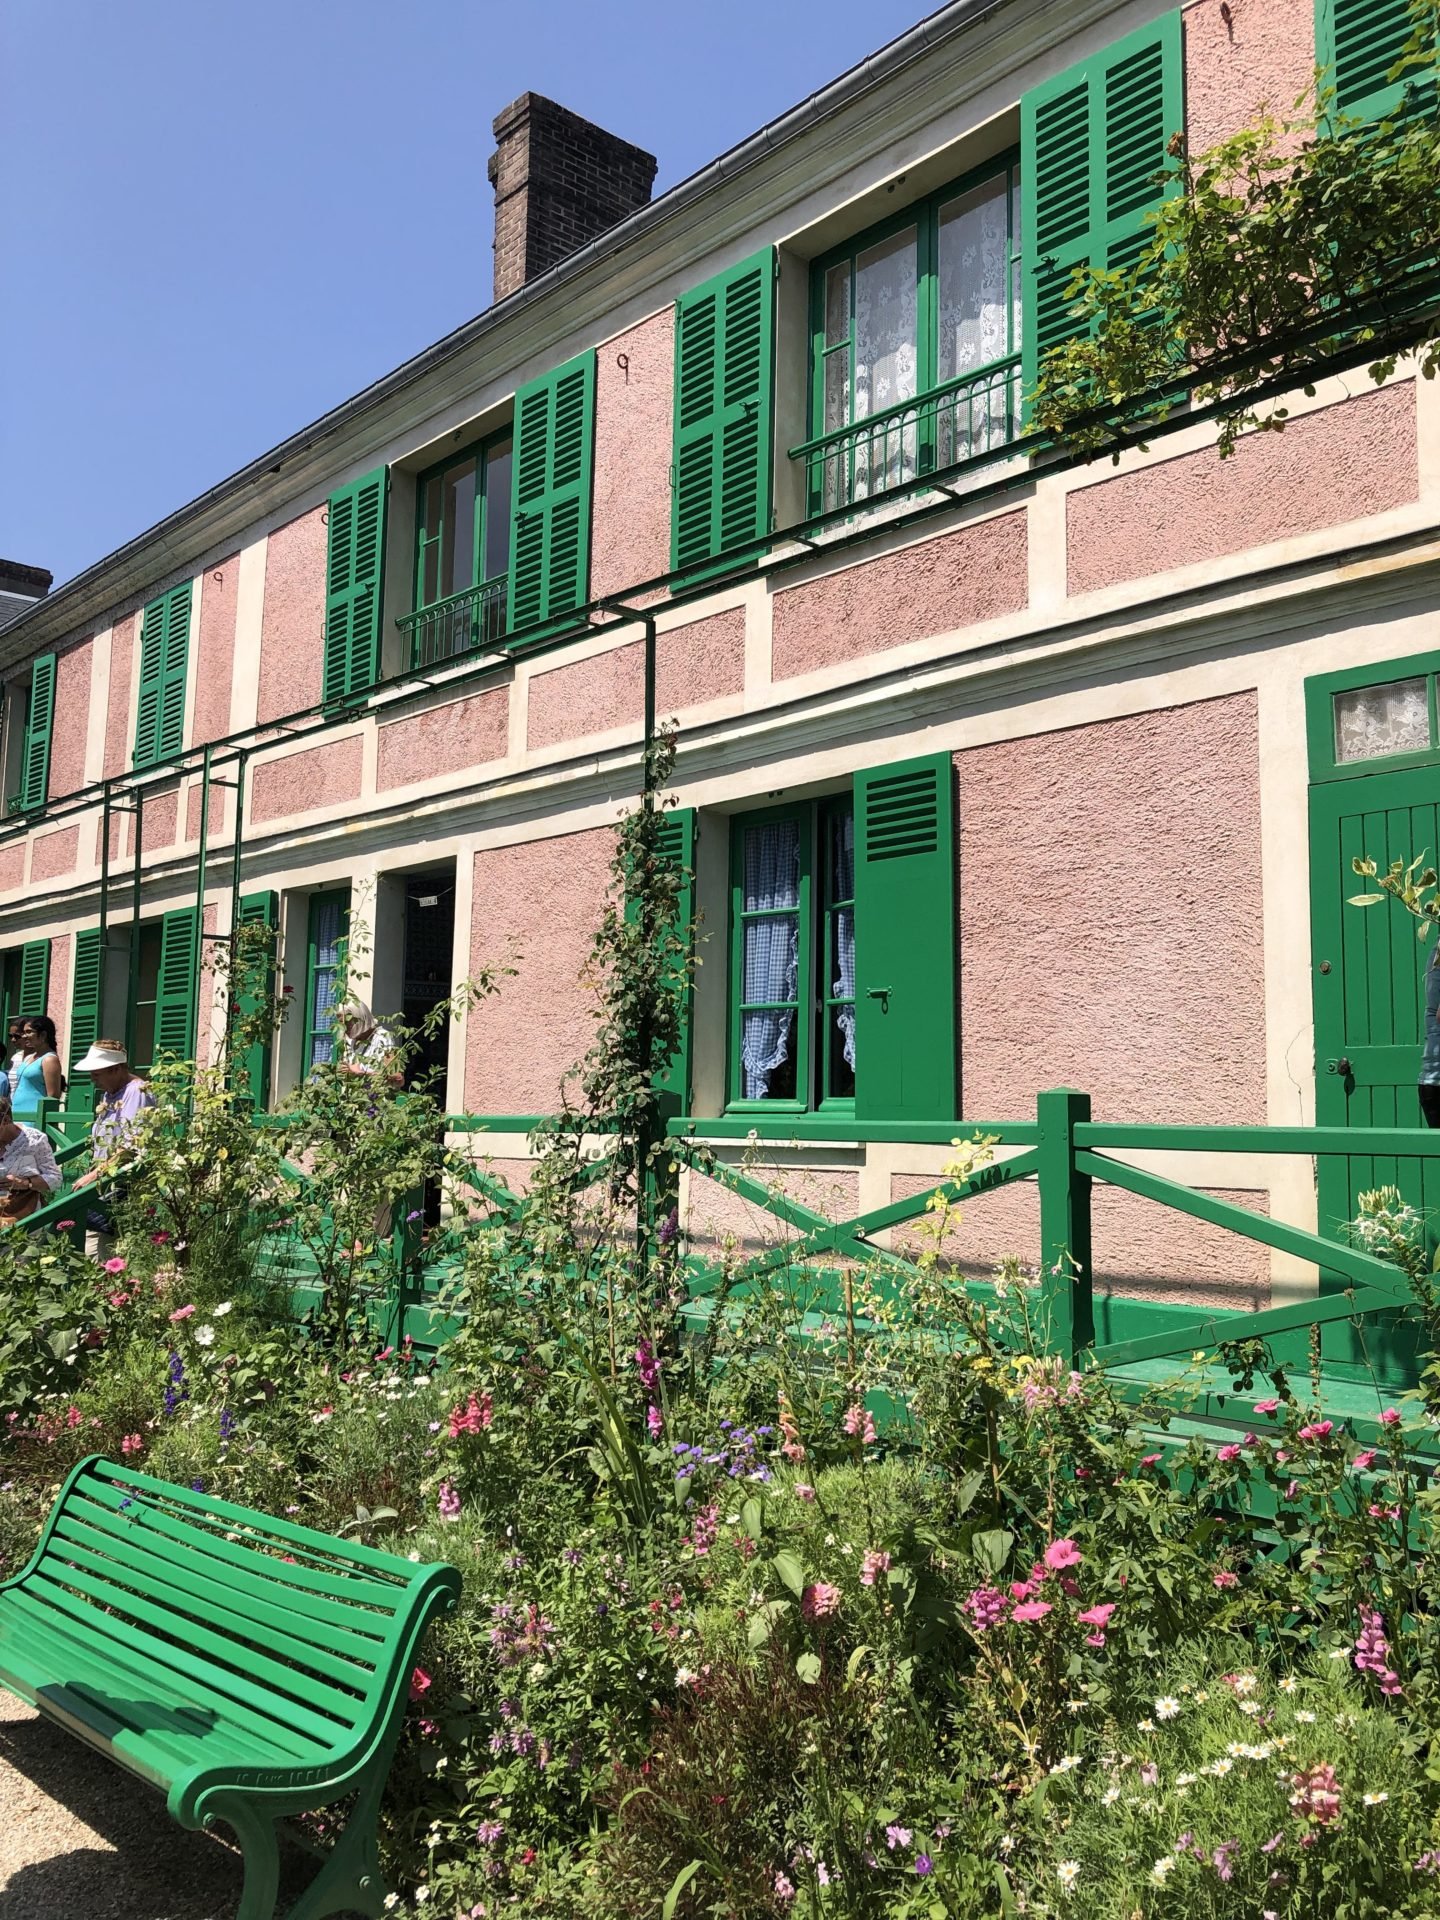 The Monet house in Giverny front veranda painted in pink and green